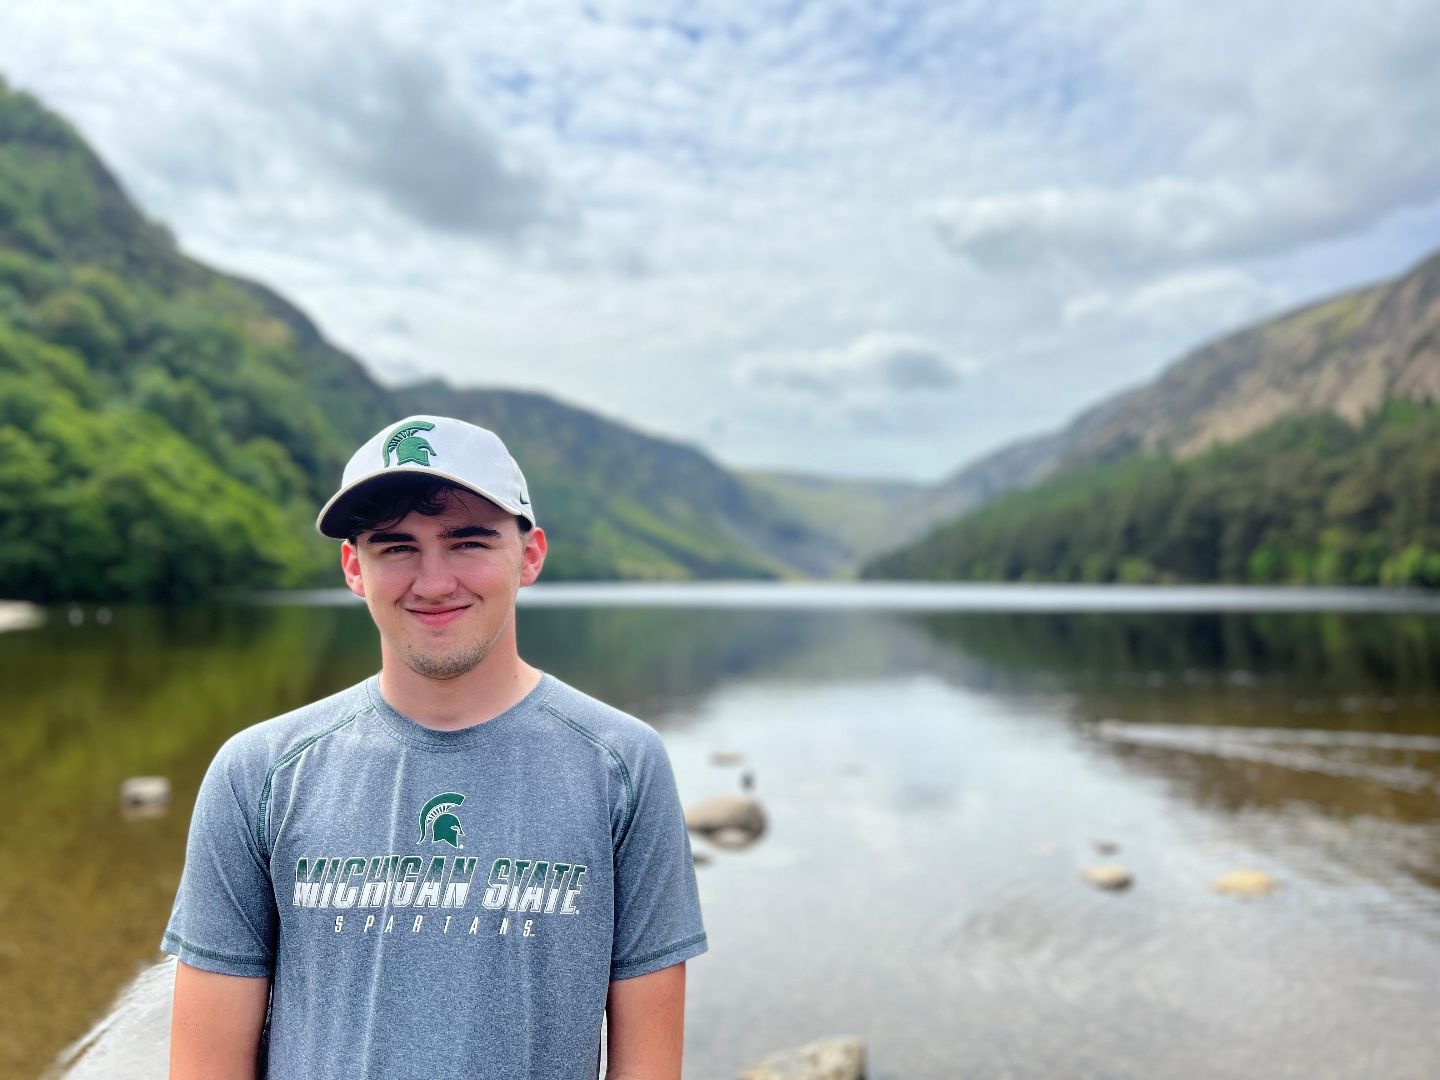 Andrew in front of lake while hiking in Glendalough, Ireland